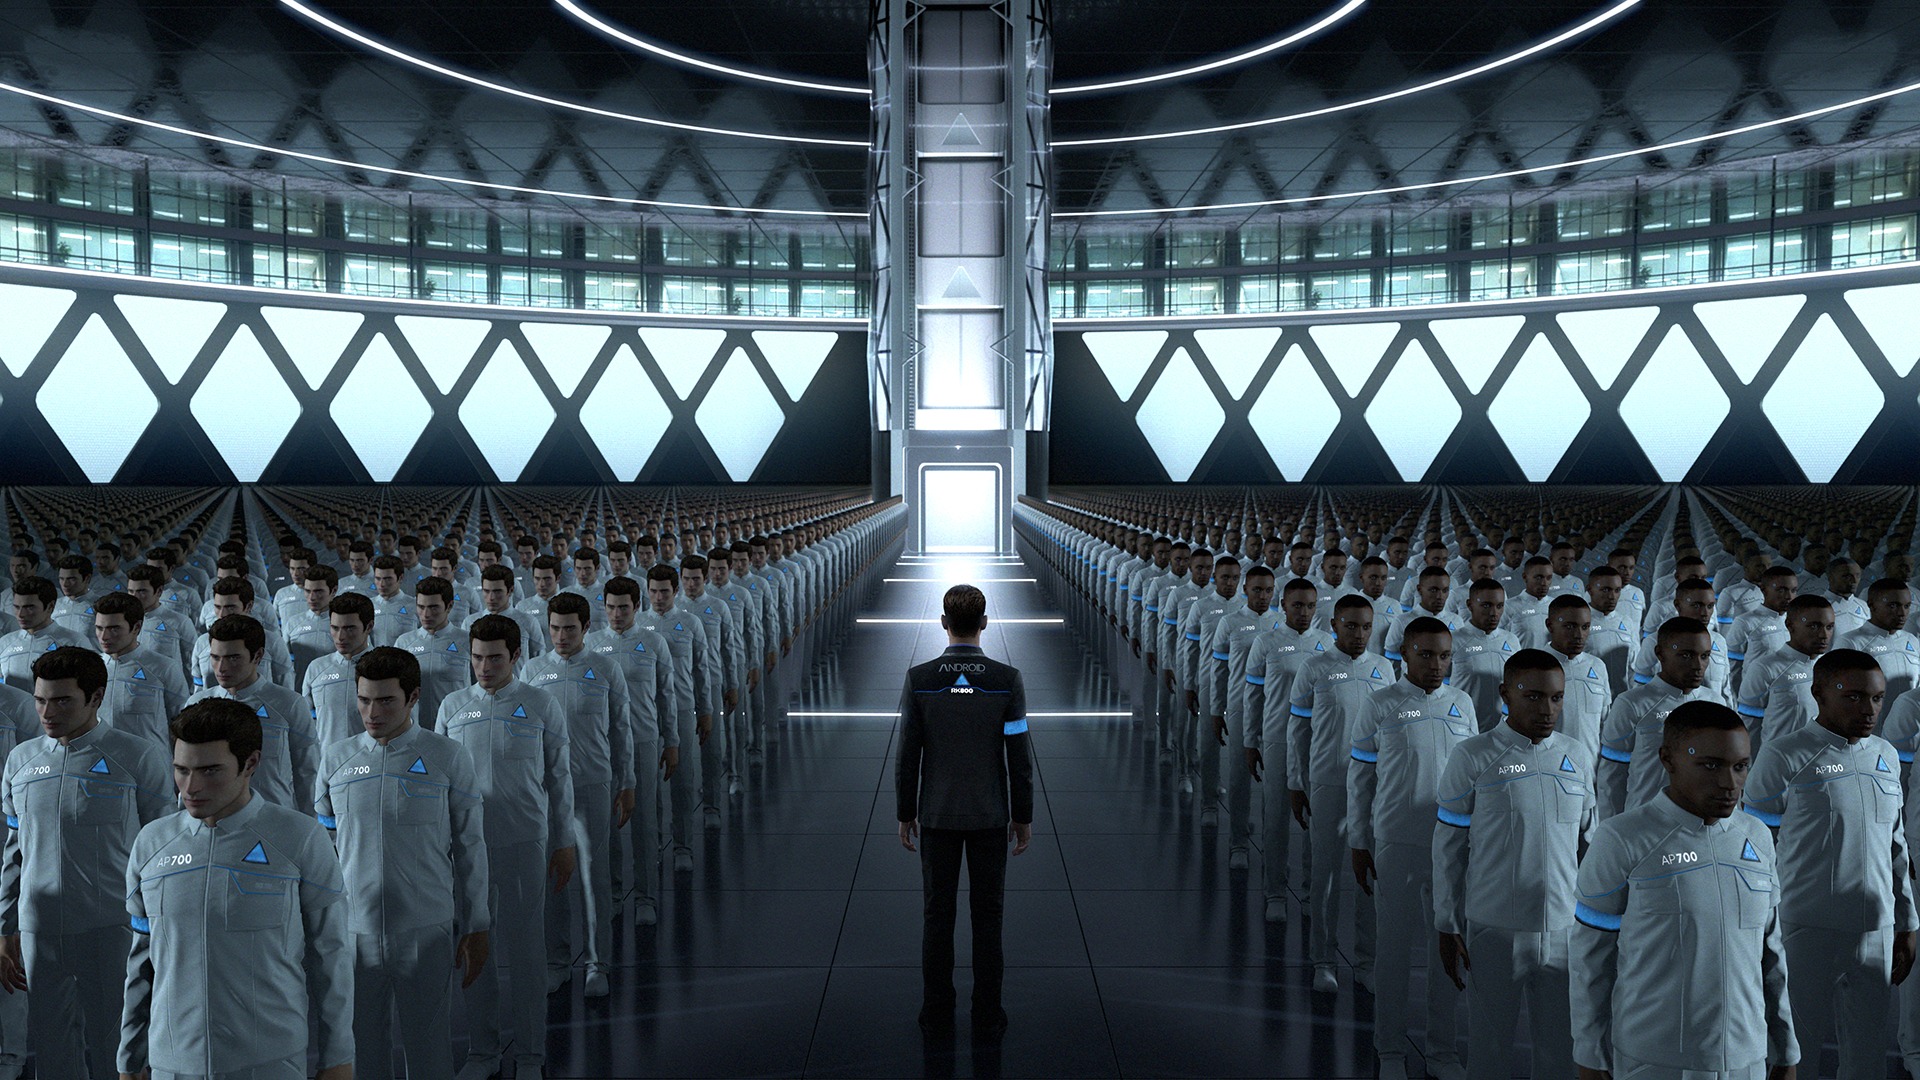 Screenshot from the game "Detroit: Become Human" showing hundreds of Androids